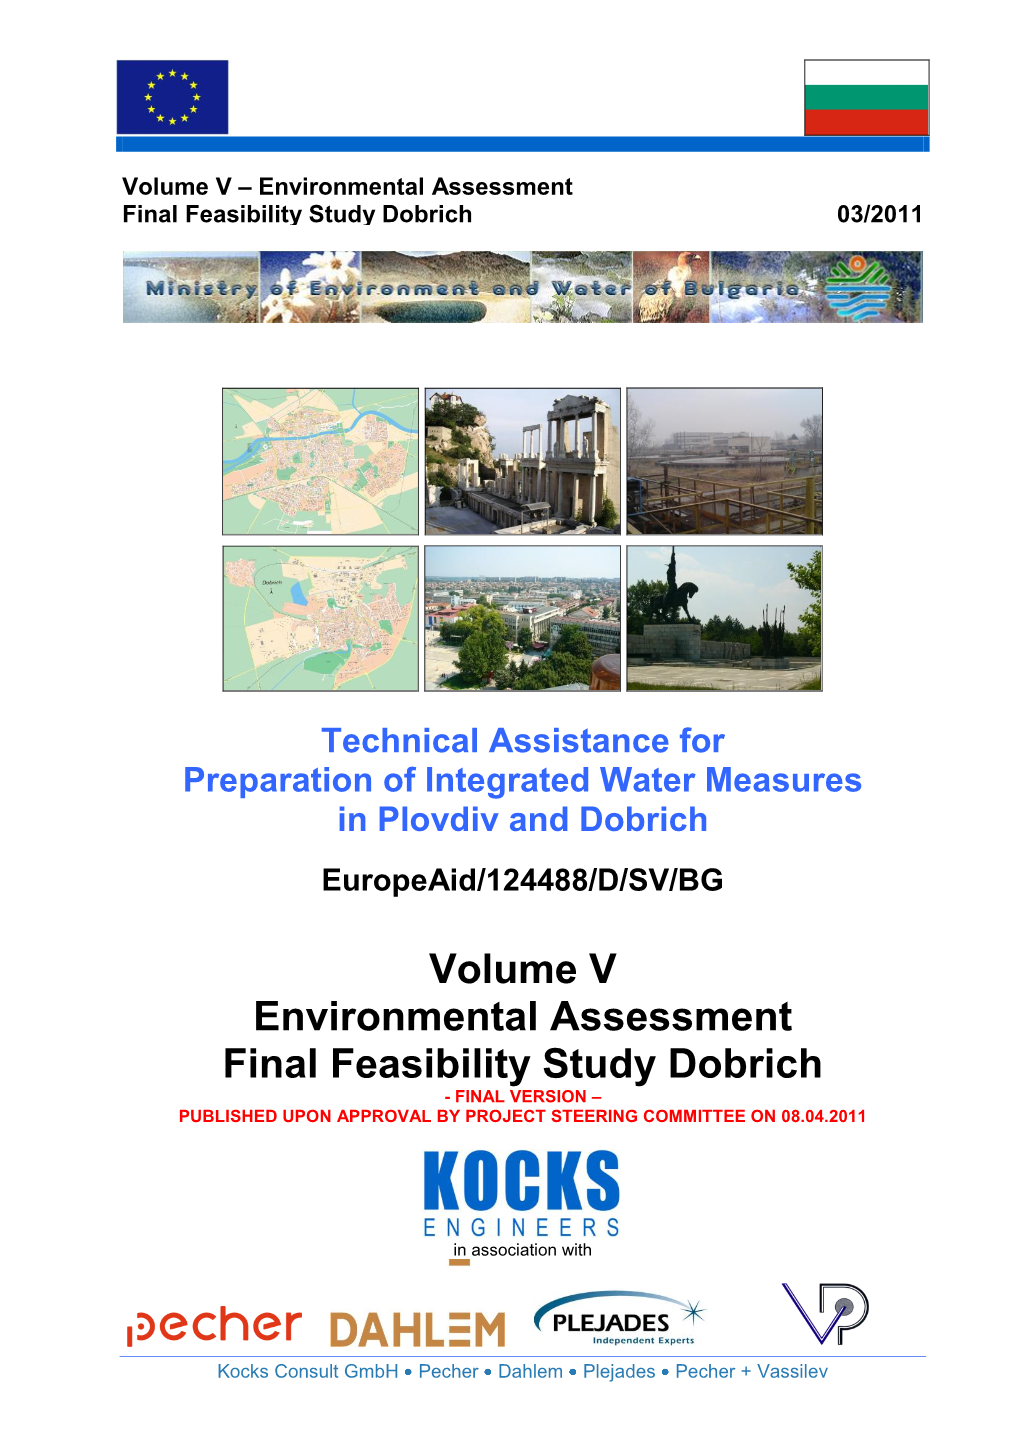 Volume V Environmental Assessment Final Feasibility Study Dobrich - FINAL VERSION – PUBLISHED UPON APPROVAL by PROJECT STEERING COMMITTEE on 08.04.2011